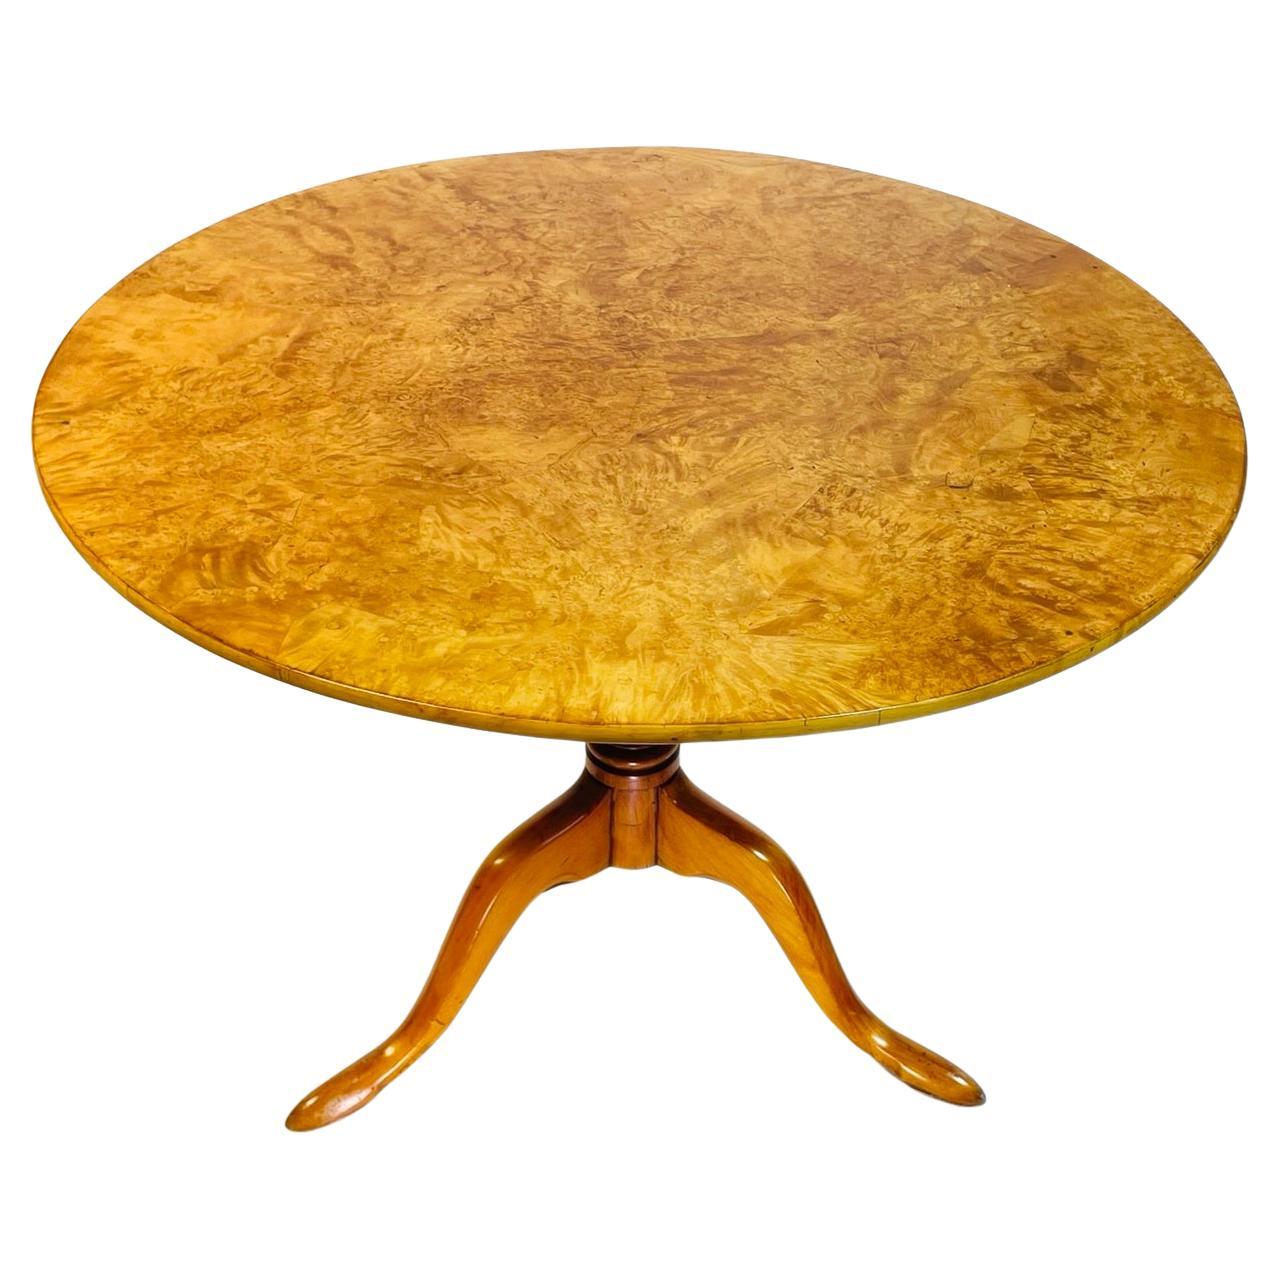 Introducing the exquisitely crafted Swedish Tilt Top Table in Birchwood Root Veneer, hailing from the picturesque Sweden of the 1940s. This timeless treasure is a captivating blend of sophistication and functionality, designed to elevate any living